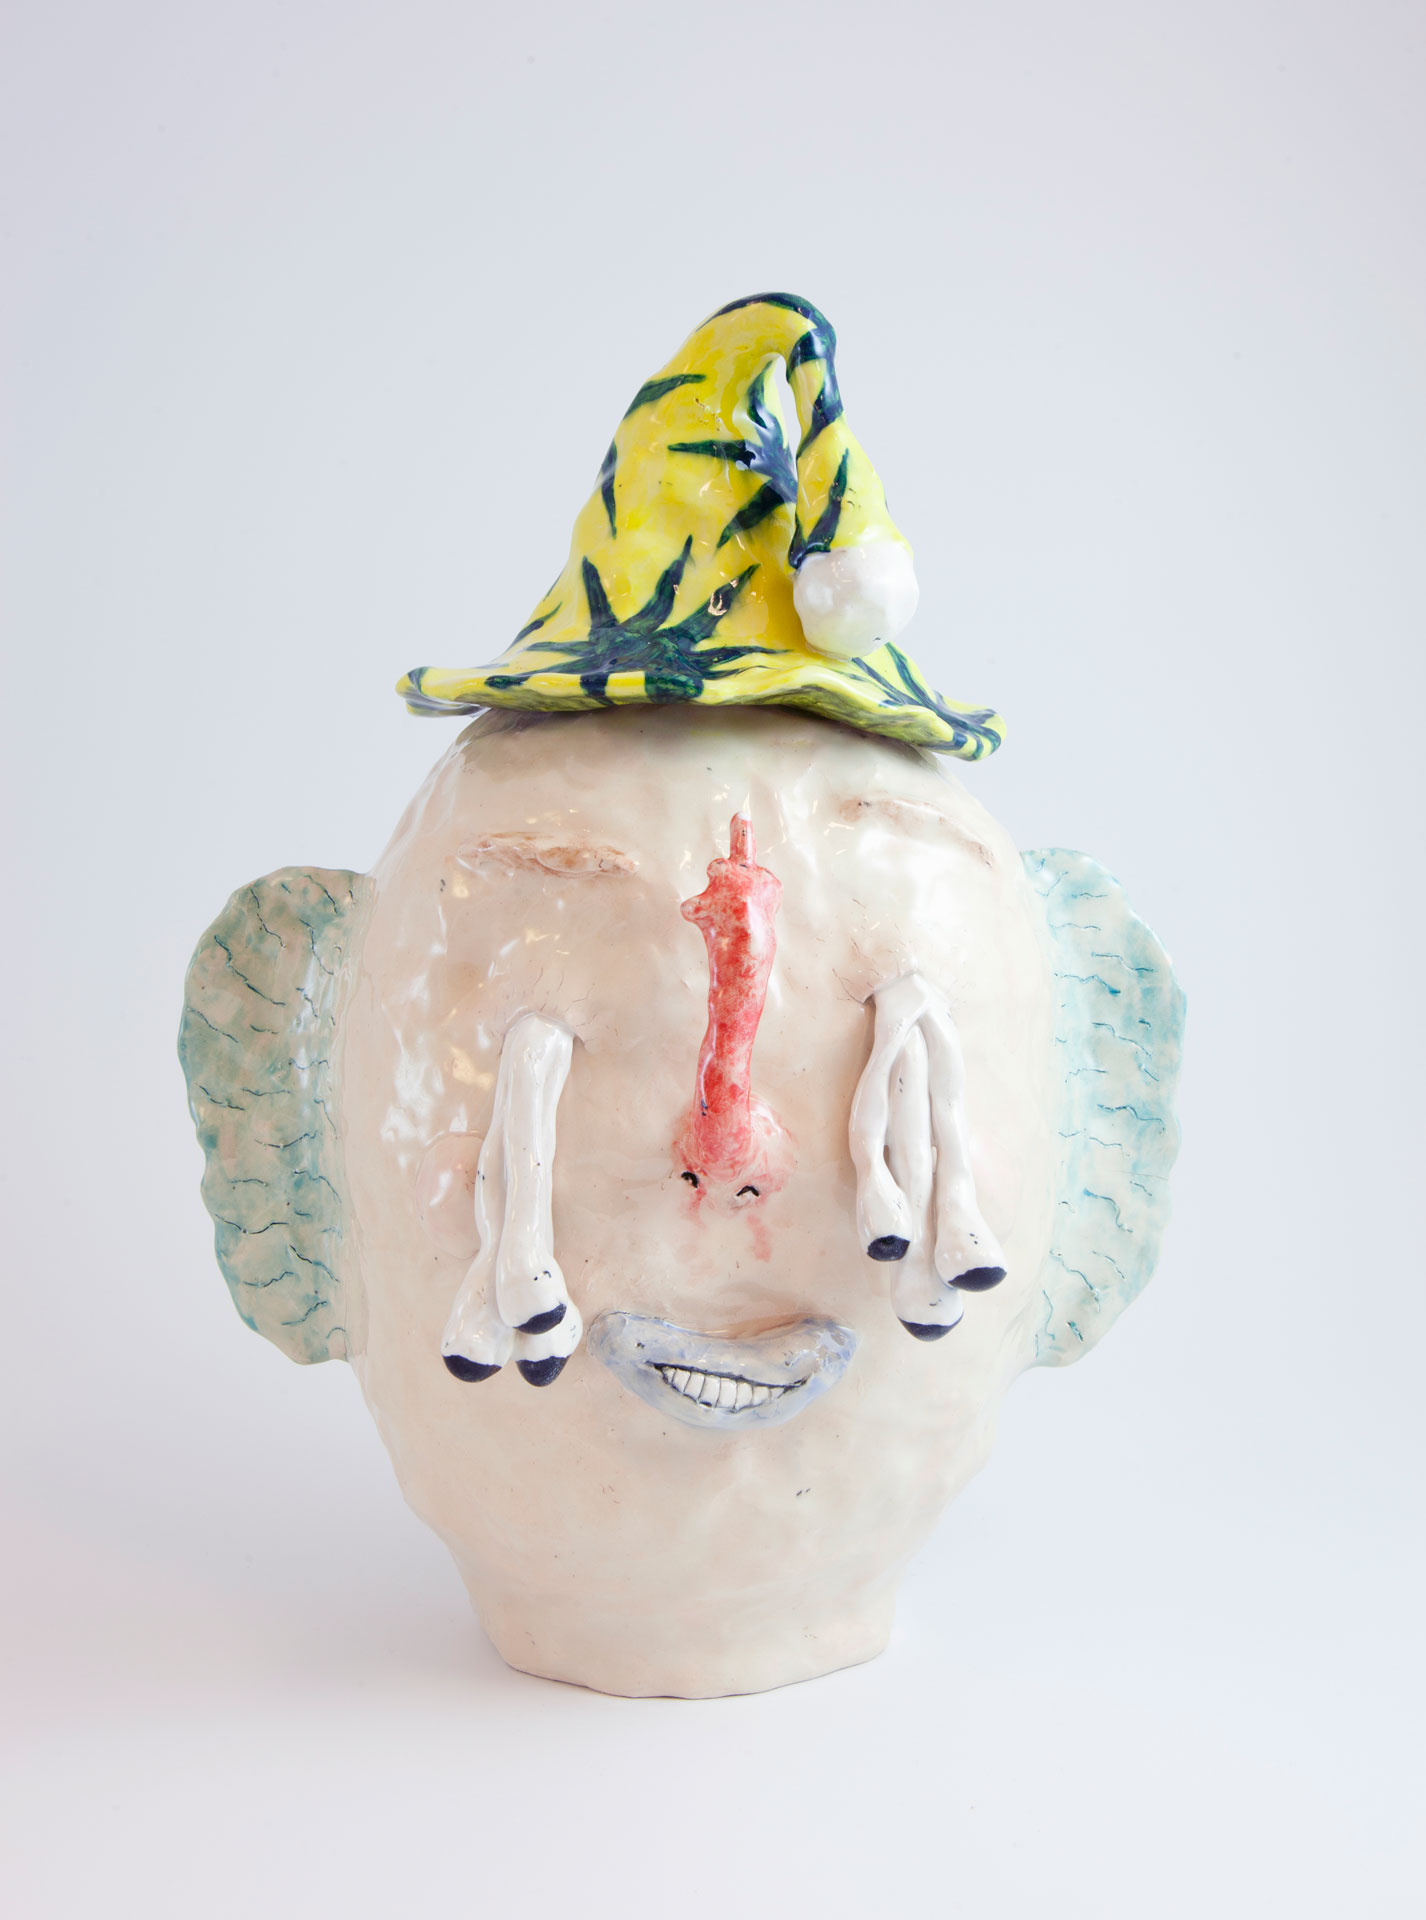 Beige-Head-with-Fun-Nose-and-Multiple-Eyes-·-2018-·-Glazed-ceramic-·-33-x-25-x-24-cm